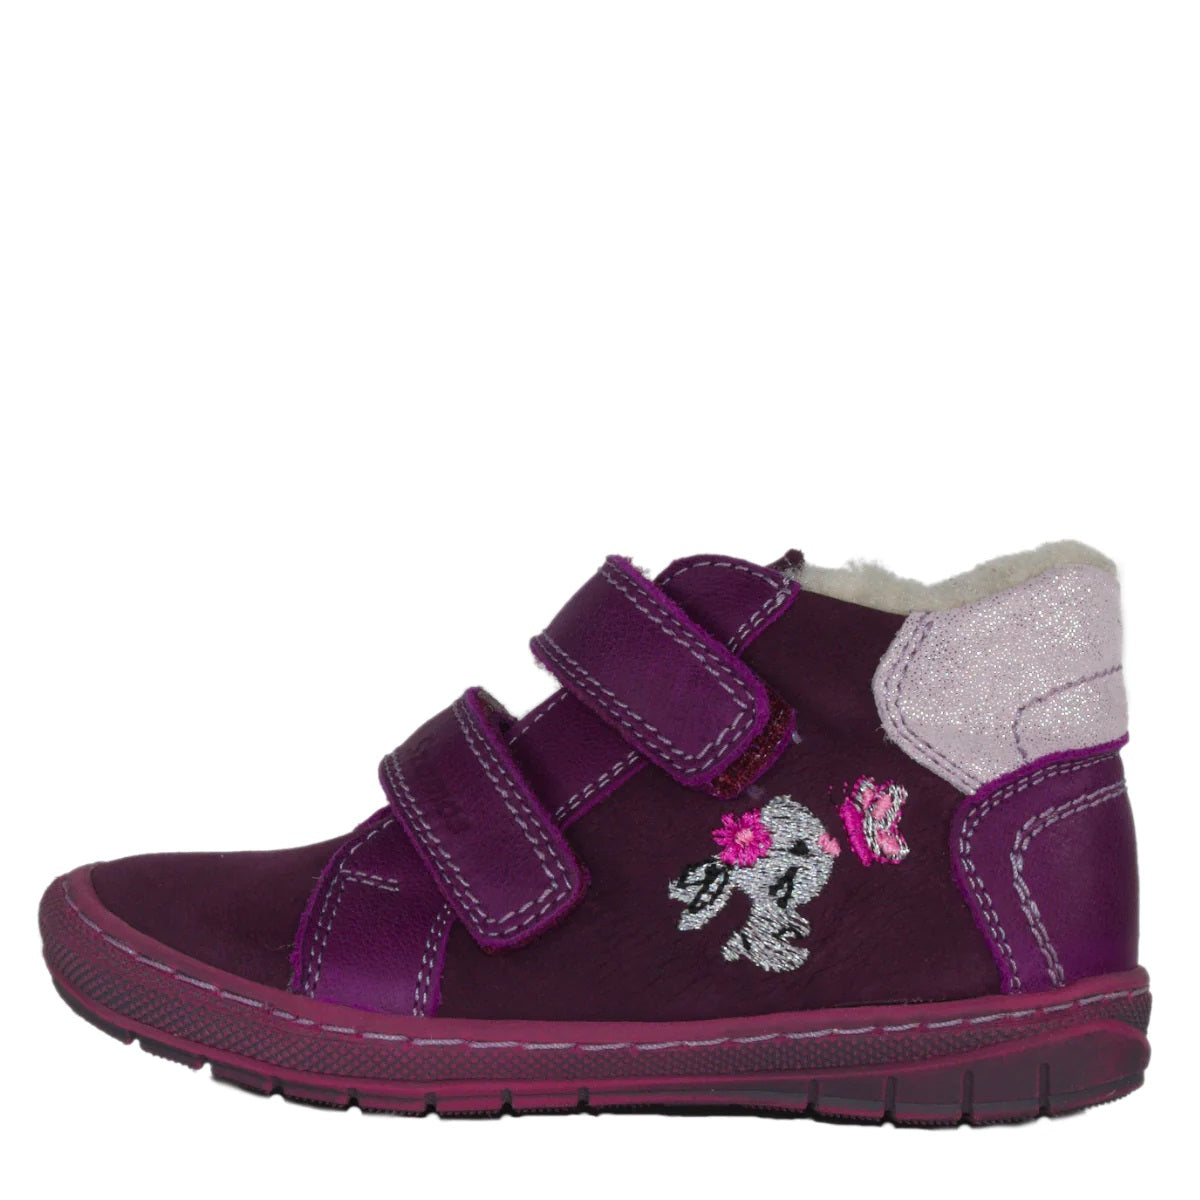 Szamos kid girl shoes burgundy with bunny and butterfly pattern toddler size